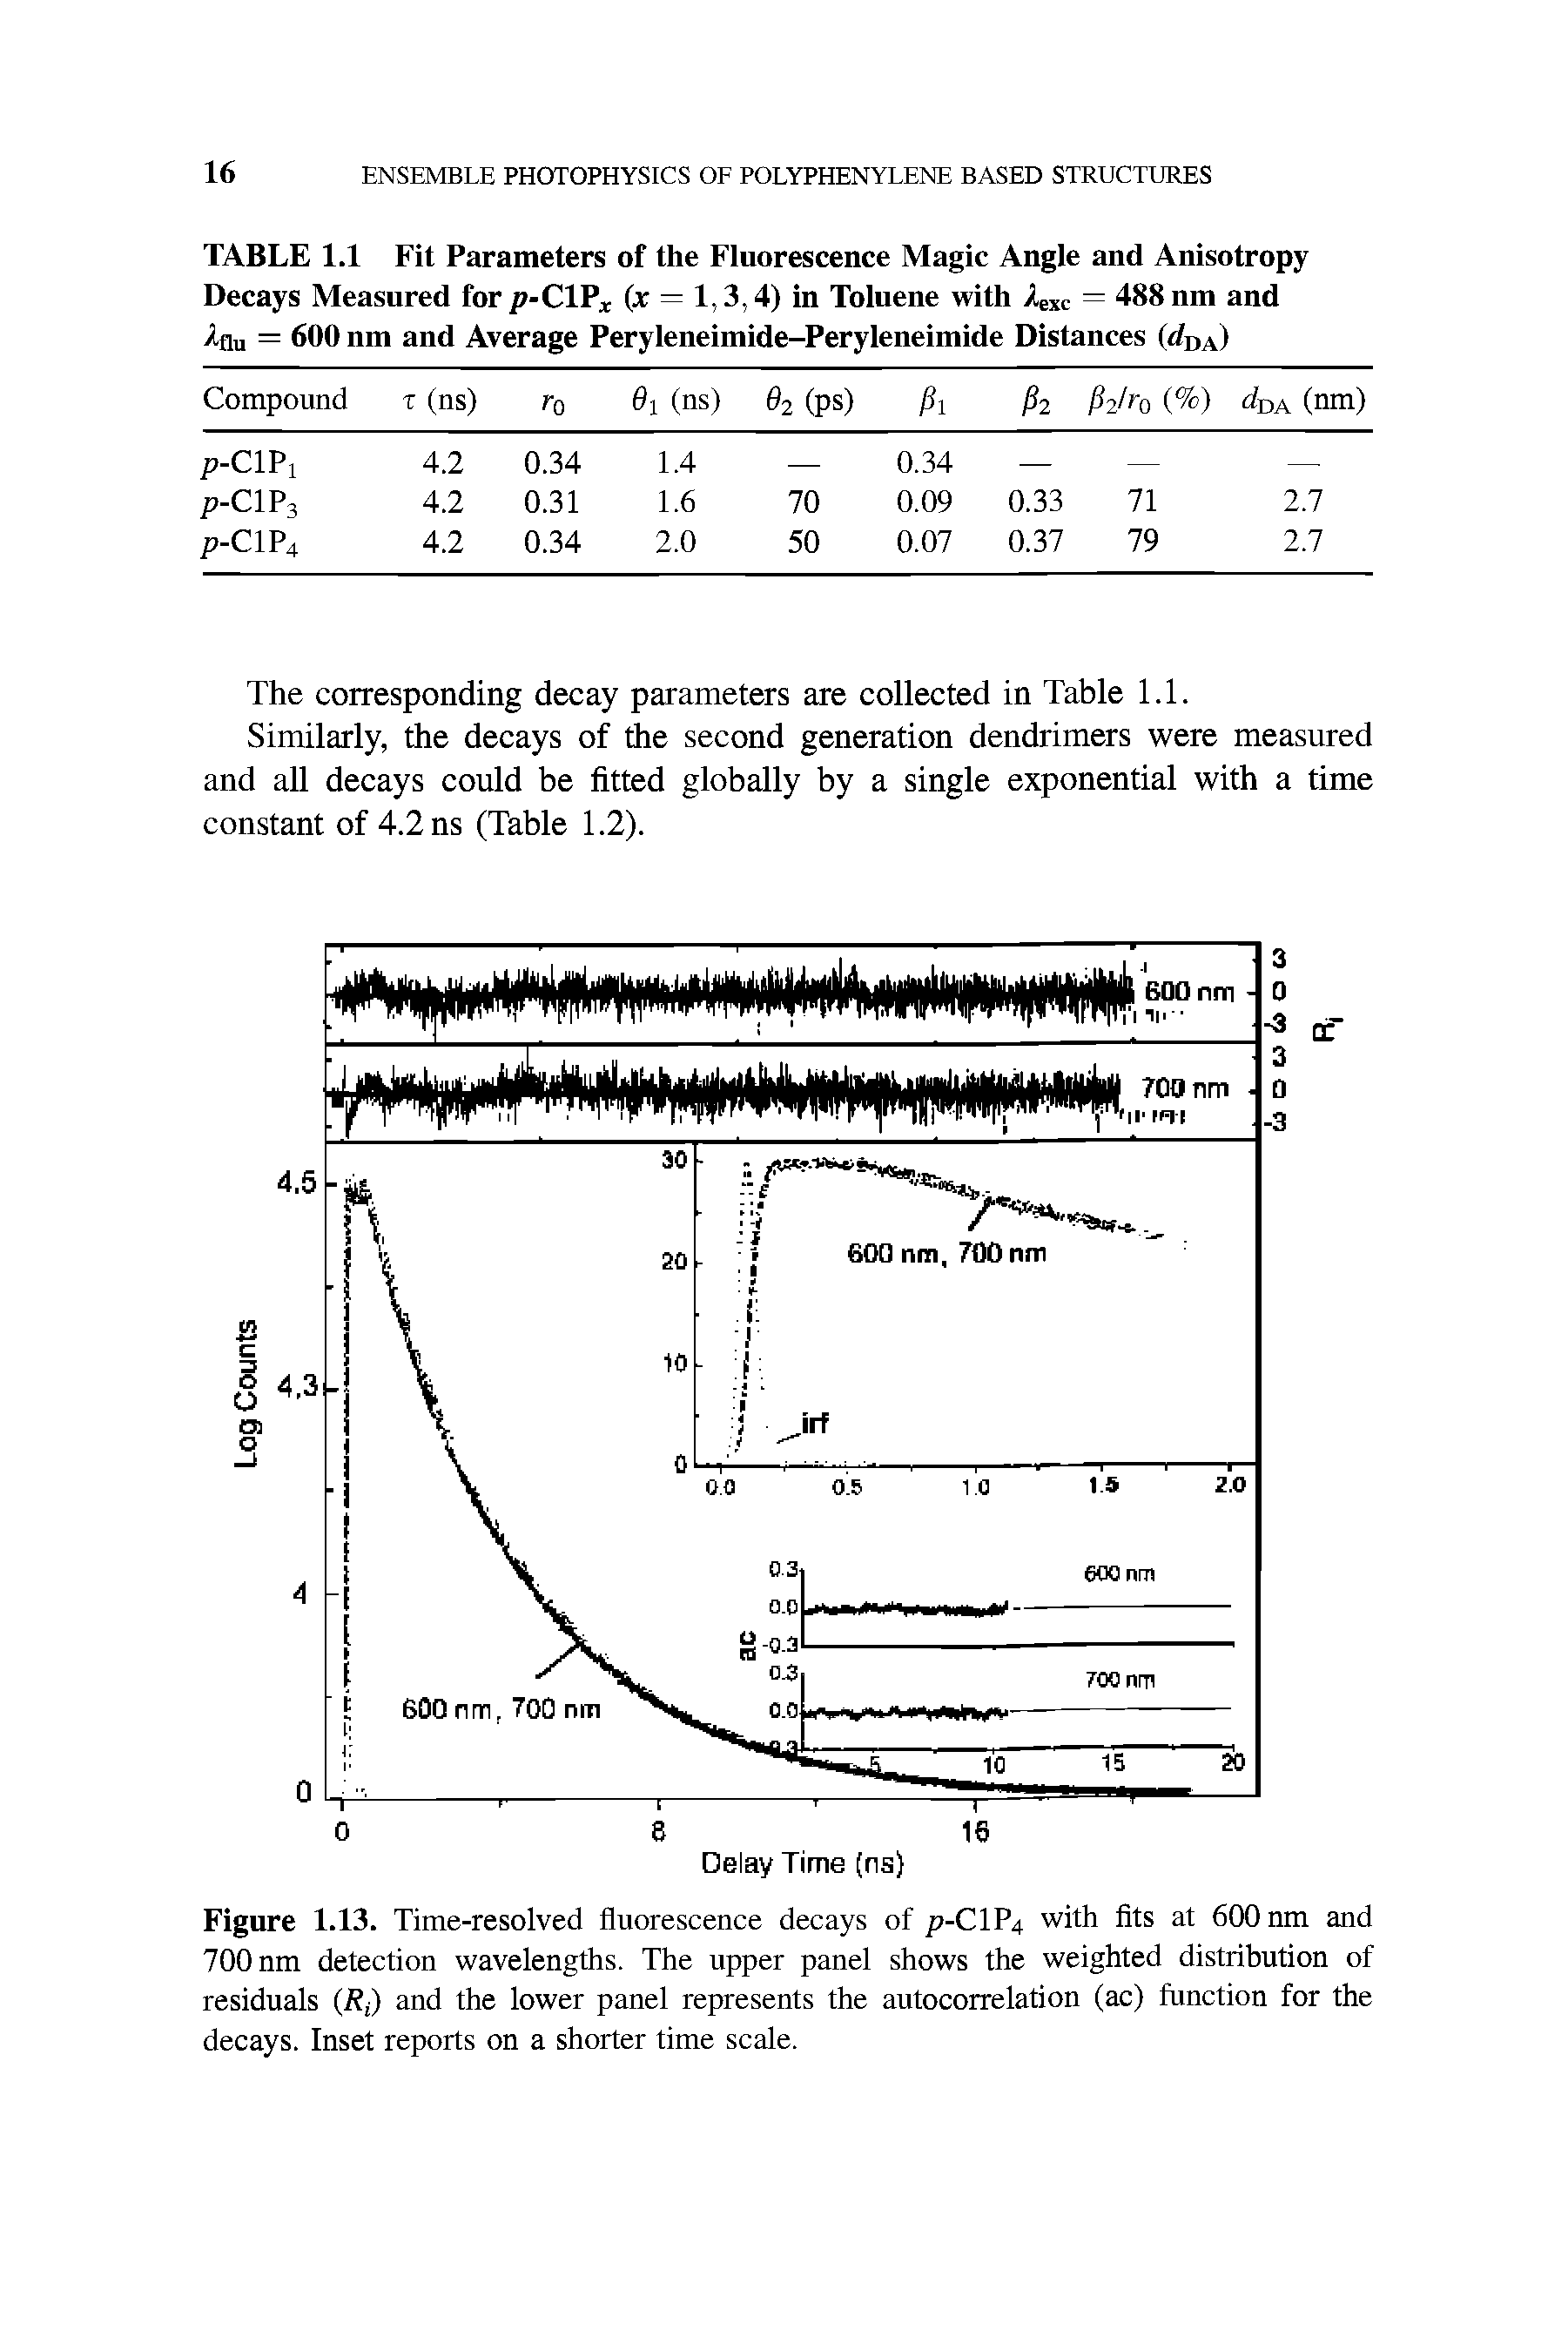 Figure 1.13. Time-resolved fluorescence decays of P-CIP4 with fits at 600 nm and 700 nm detection wavelengths. The upper panel shows the weighted distribution of residuals (Rt) and the lower panel represents the autocorrelation (ac) function for the decays. Inset reports on a shorter time scale.